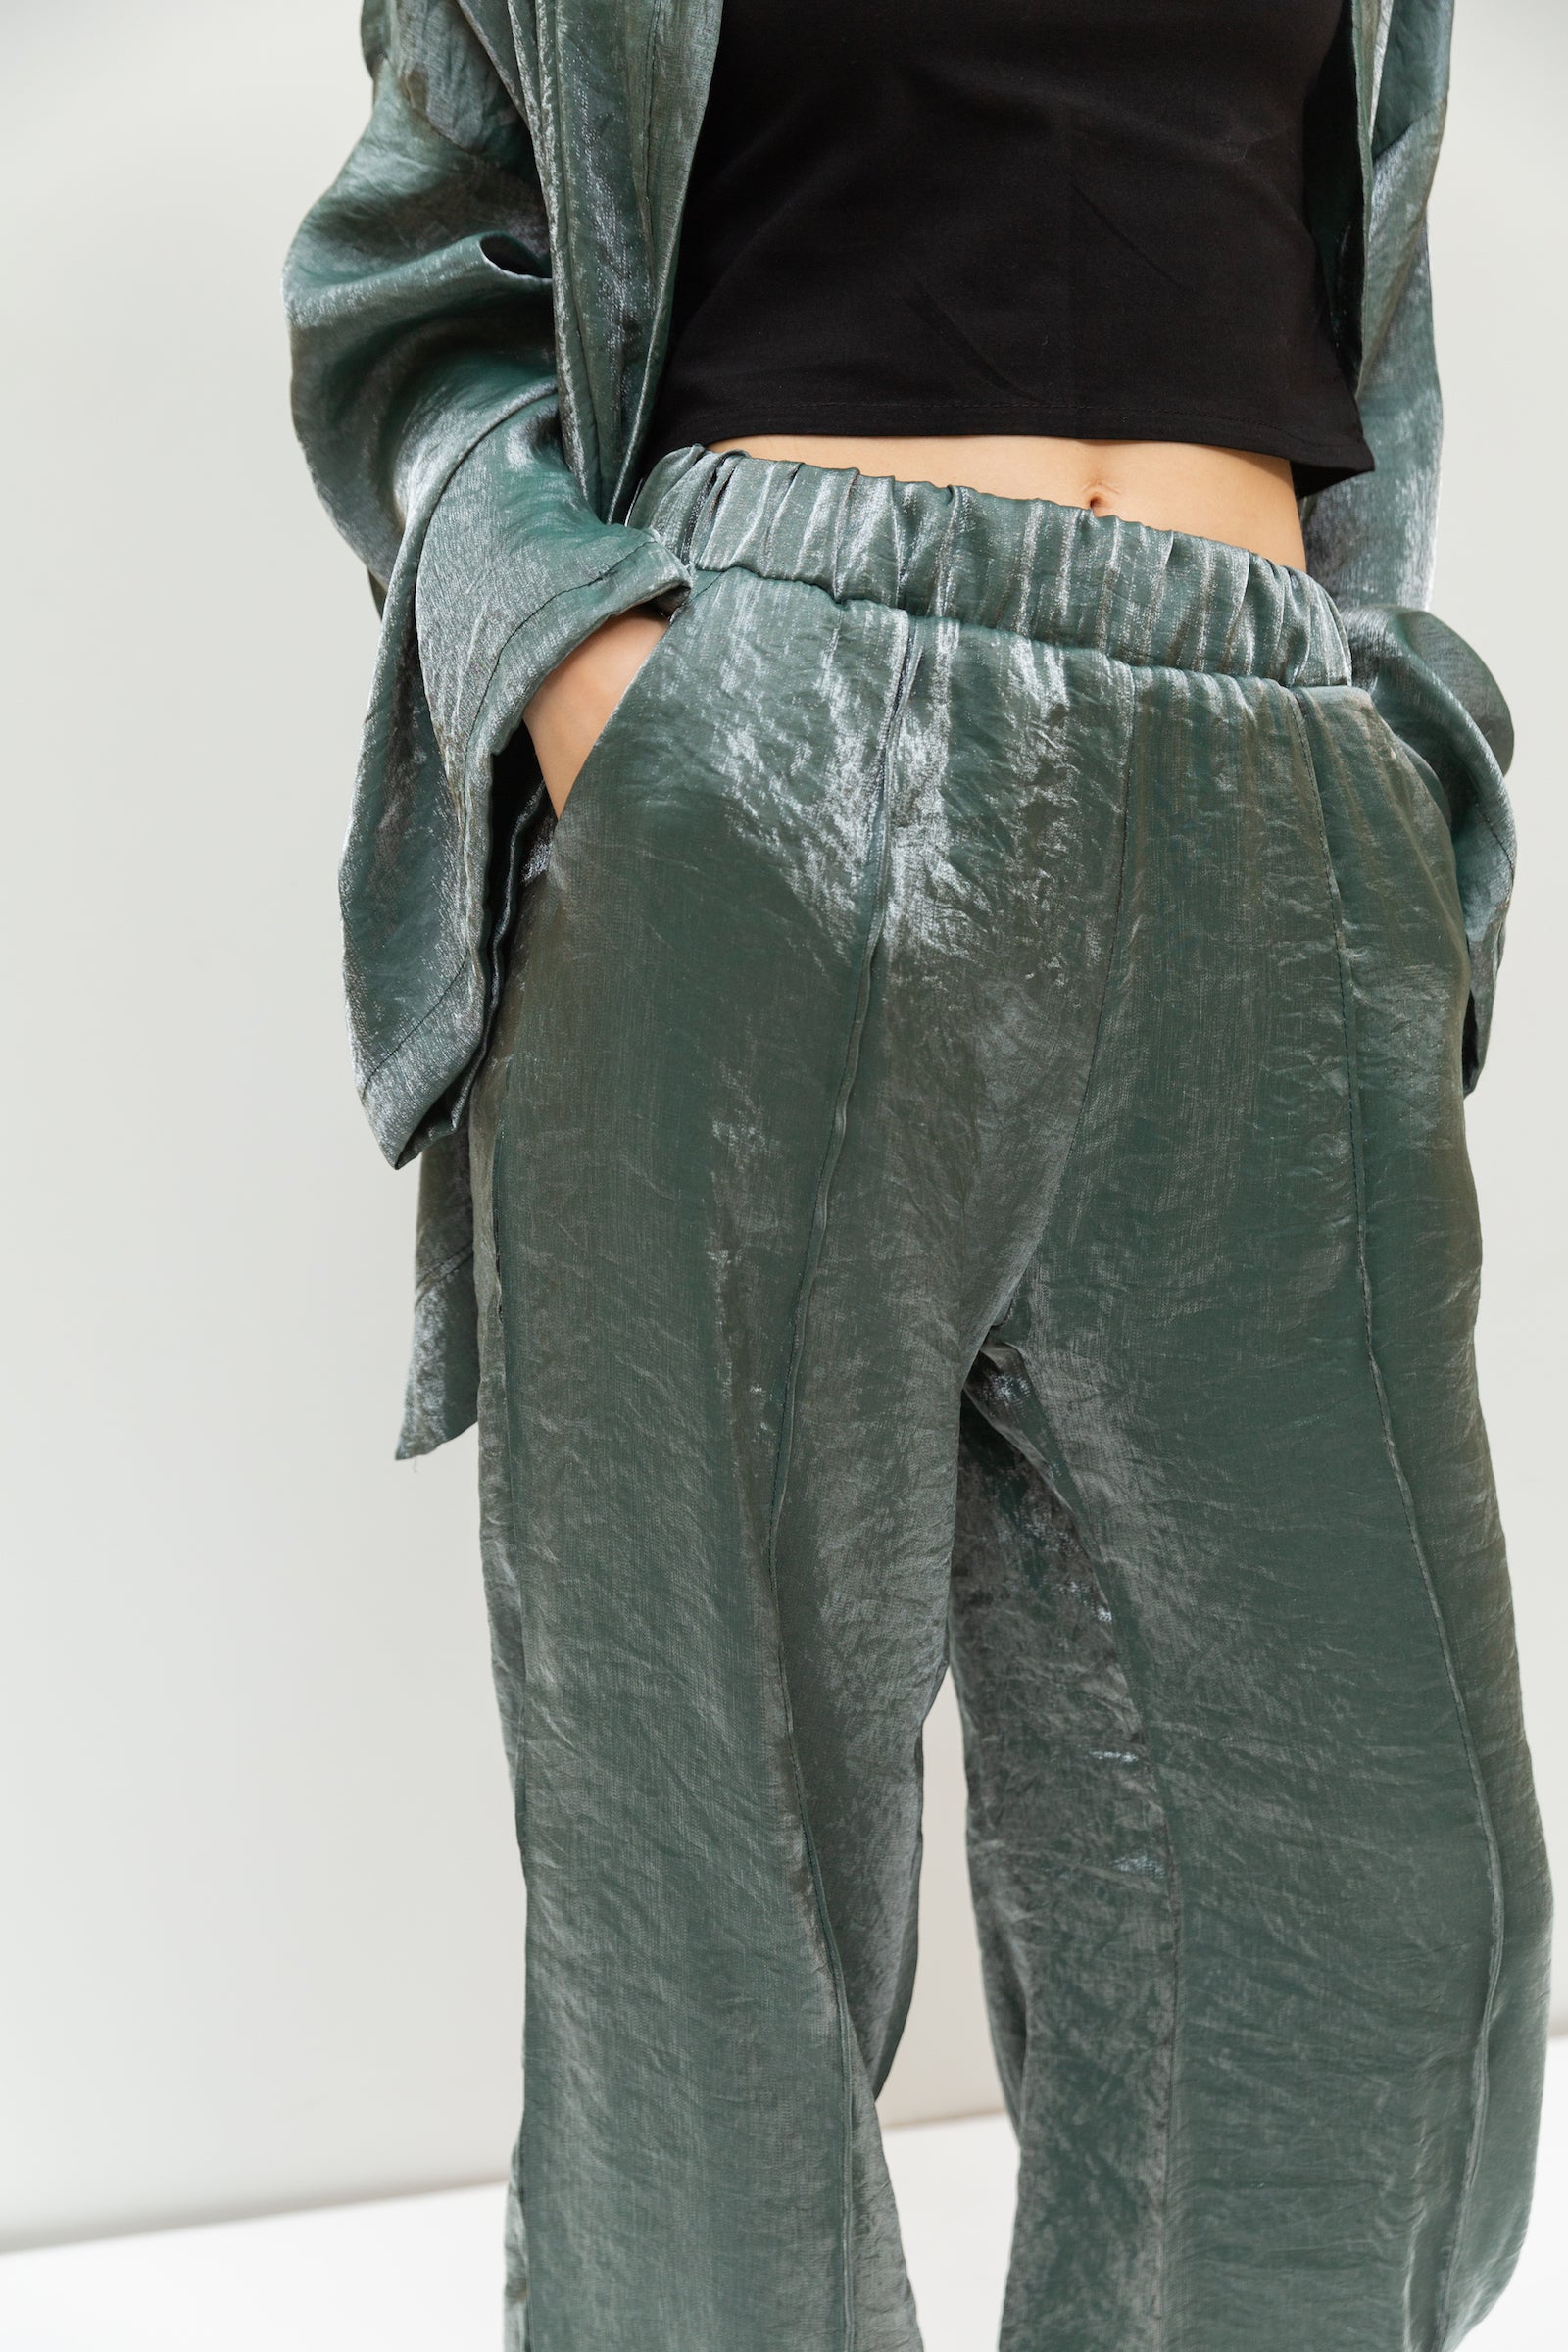 Shimmery pants in olive